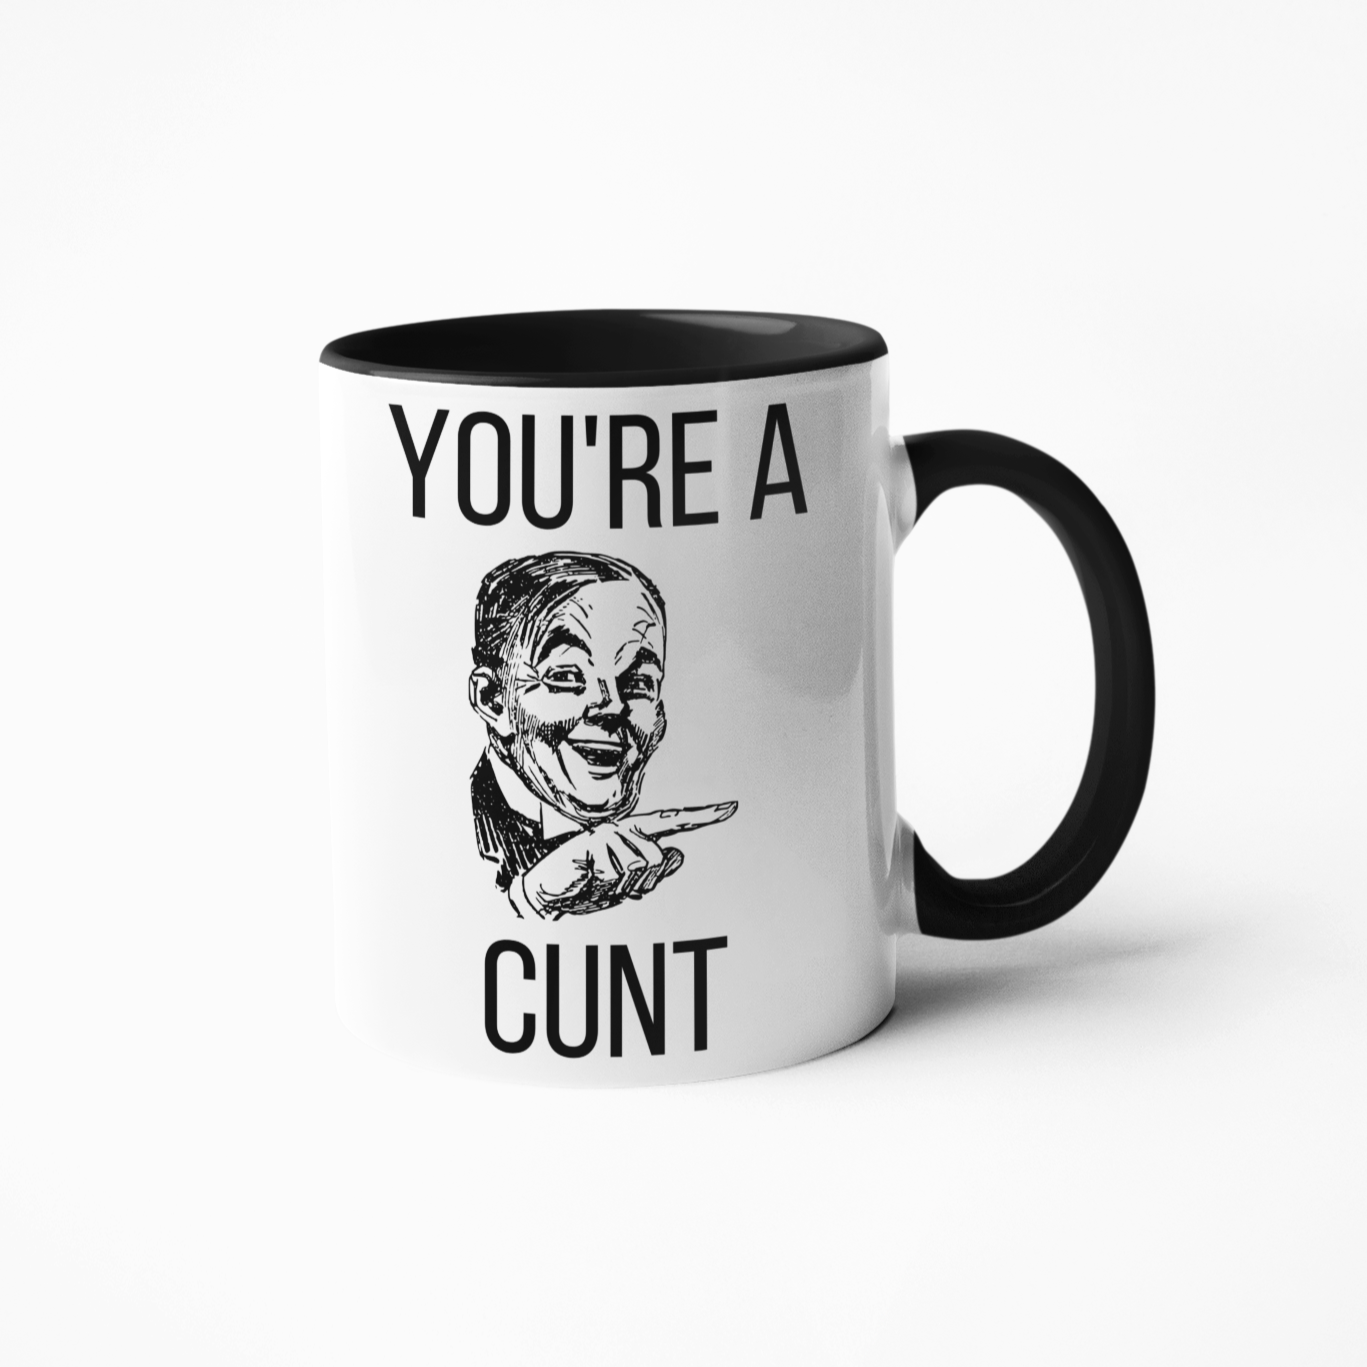 This You're a Cunt funny coffee mug is sure to add a fun twist to your morning brew routine. Crafted with premium materials, this mug is designed to last and be enjoyed for years to come. Make someone laugh with this unique gift!